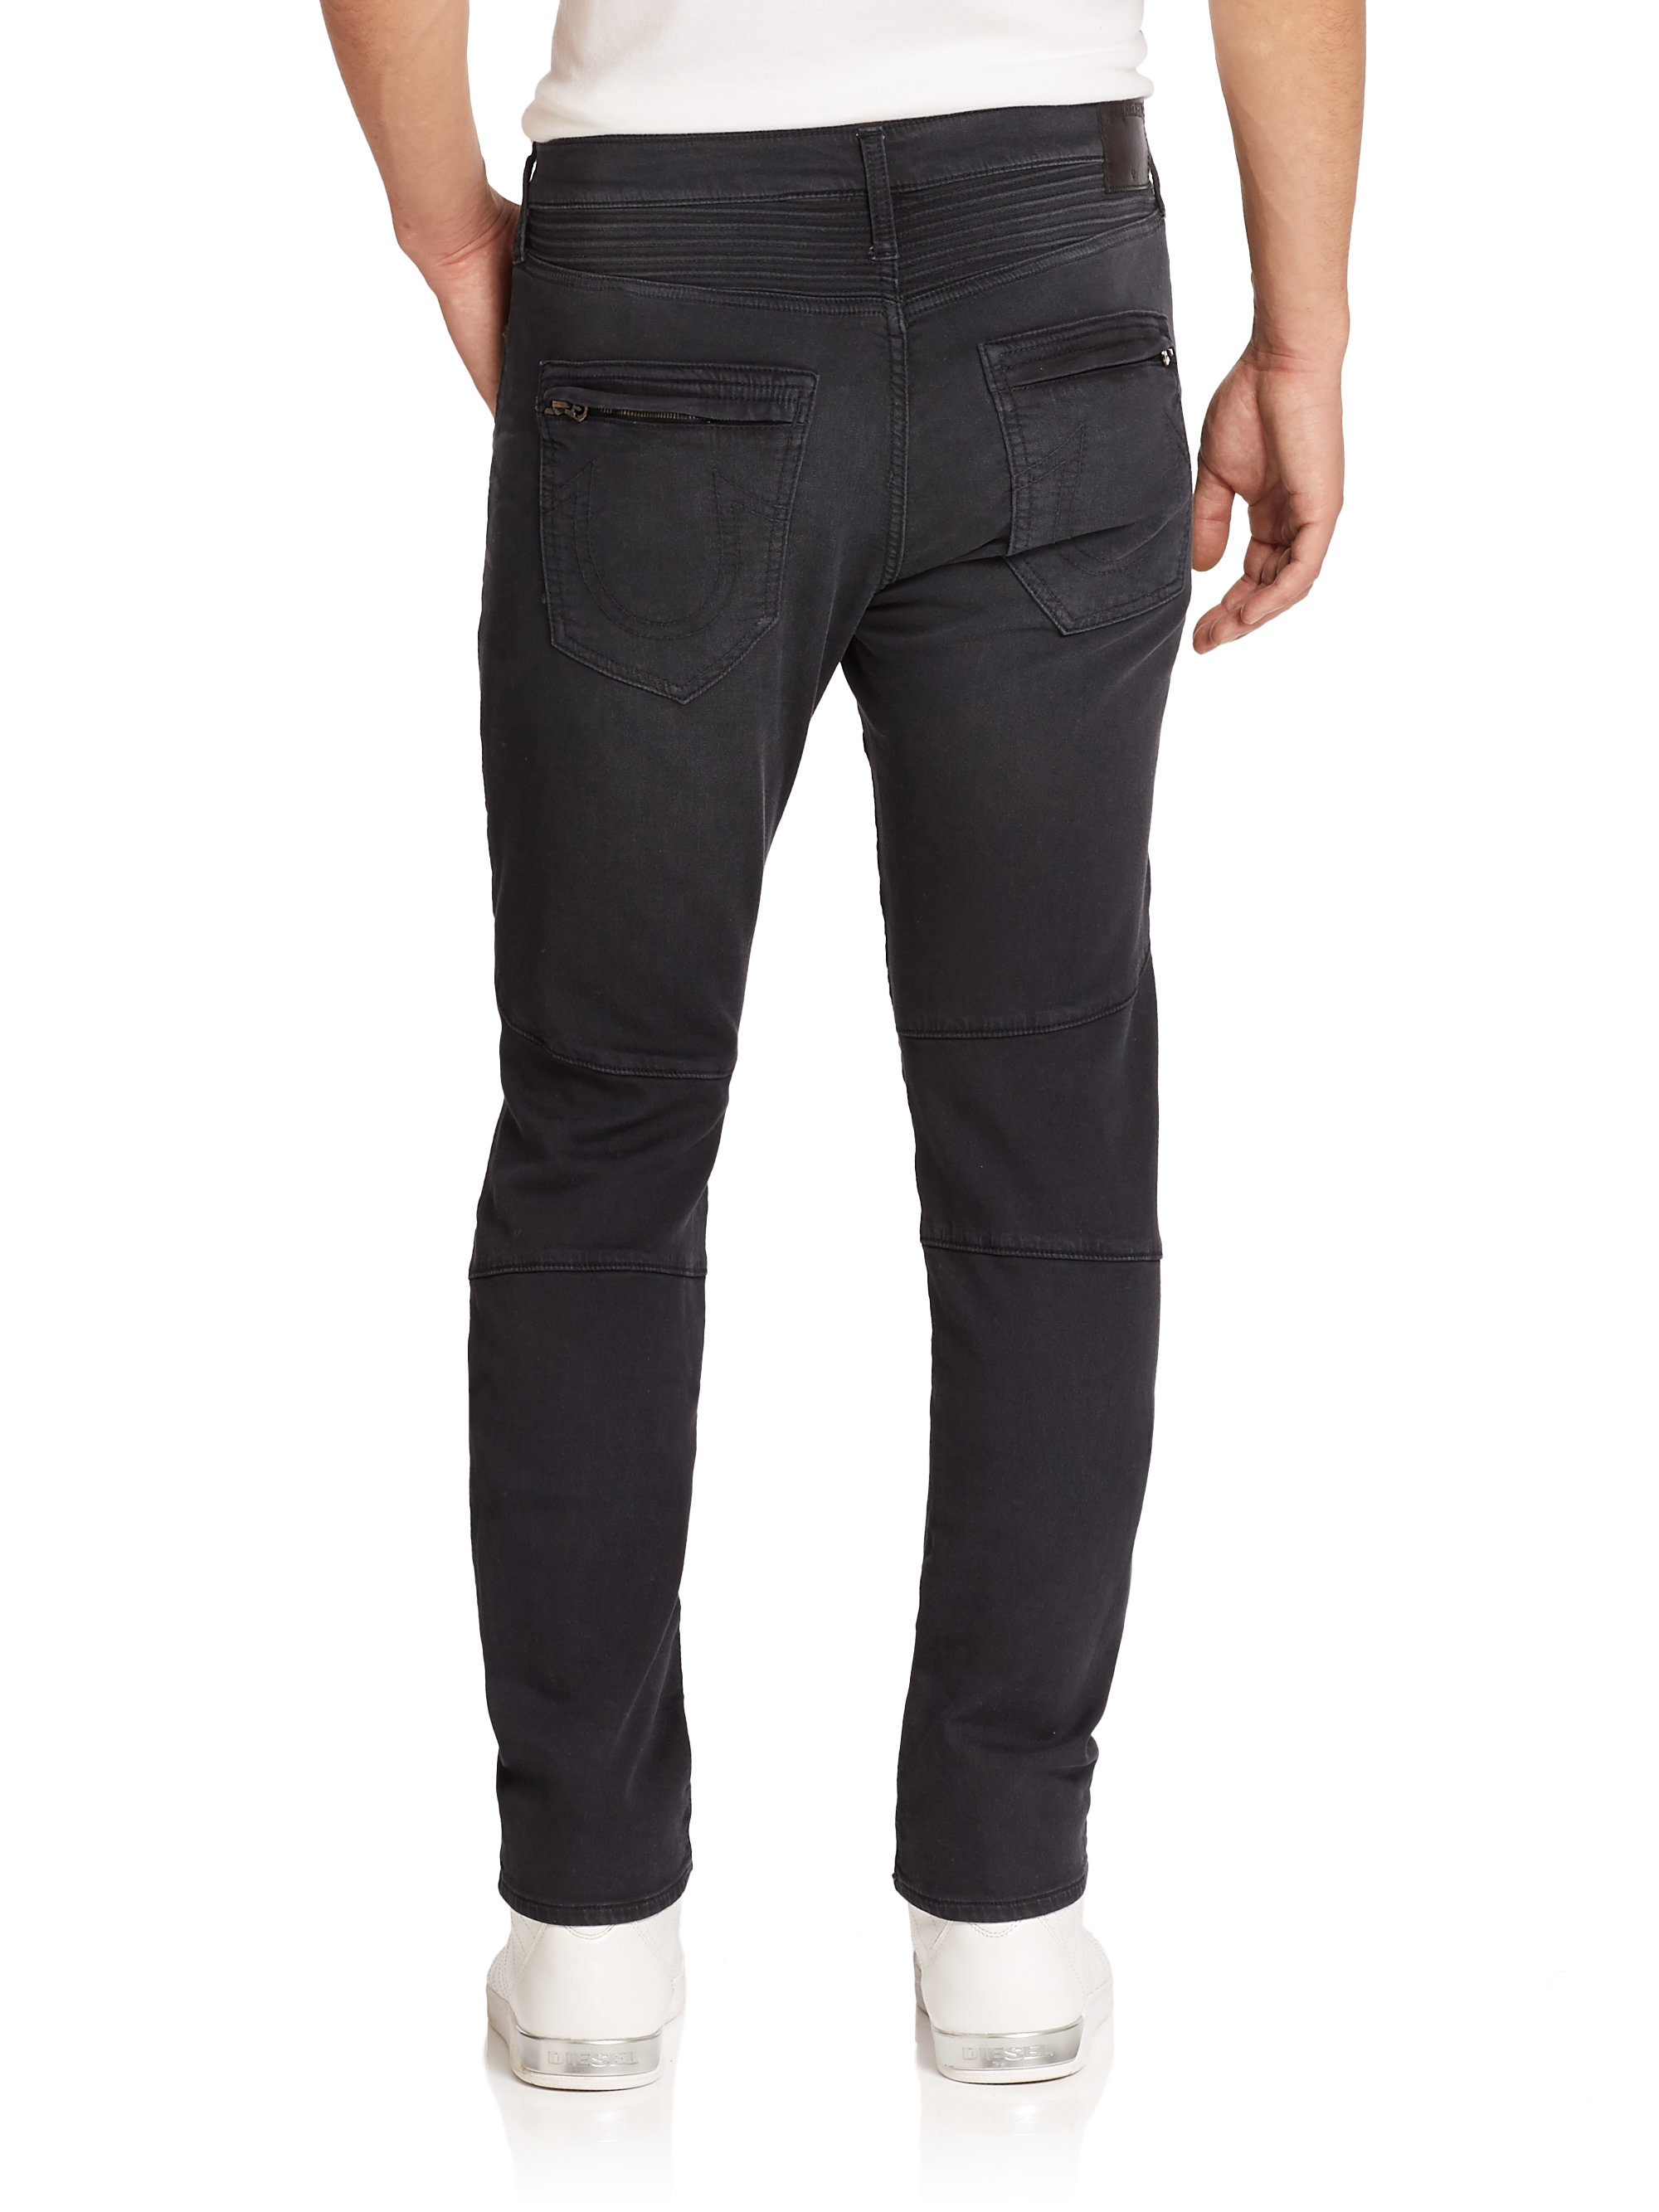 Lyst - True religion Rocco Distressed Overdyed Moto Jeans in Black for Men